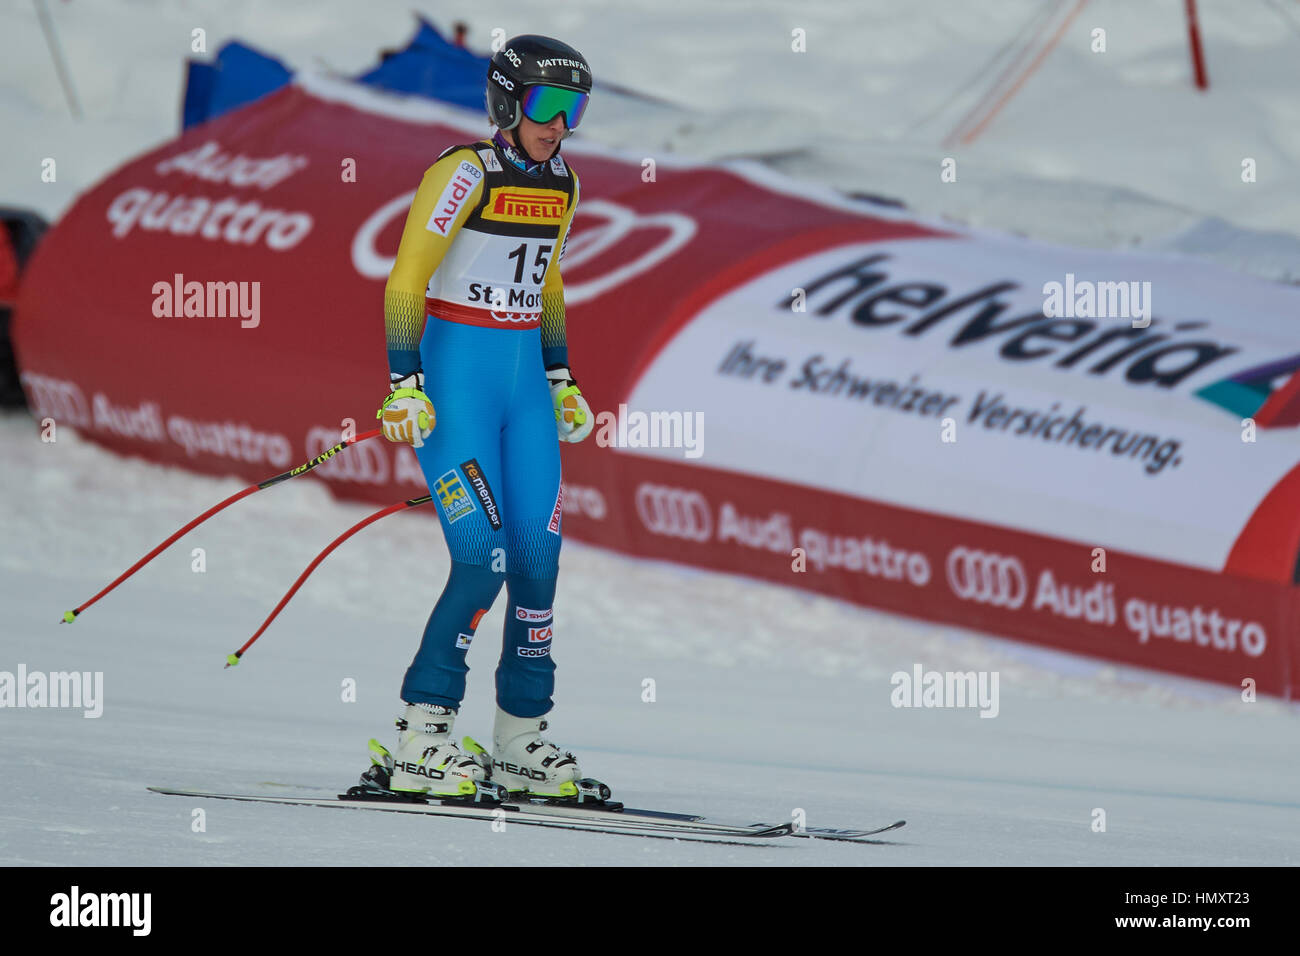 St. Moritz, Switzerland, 7th February 2017. Kajsa Kling is disapointed about her DNF in the Ladies’ Super G at the FIS Alpine World Ski Championships 2017 in St. Moritz. Credit: Rolf Simeon/Alamy Live News Stock Photo